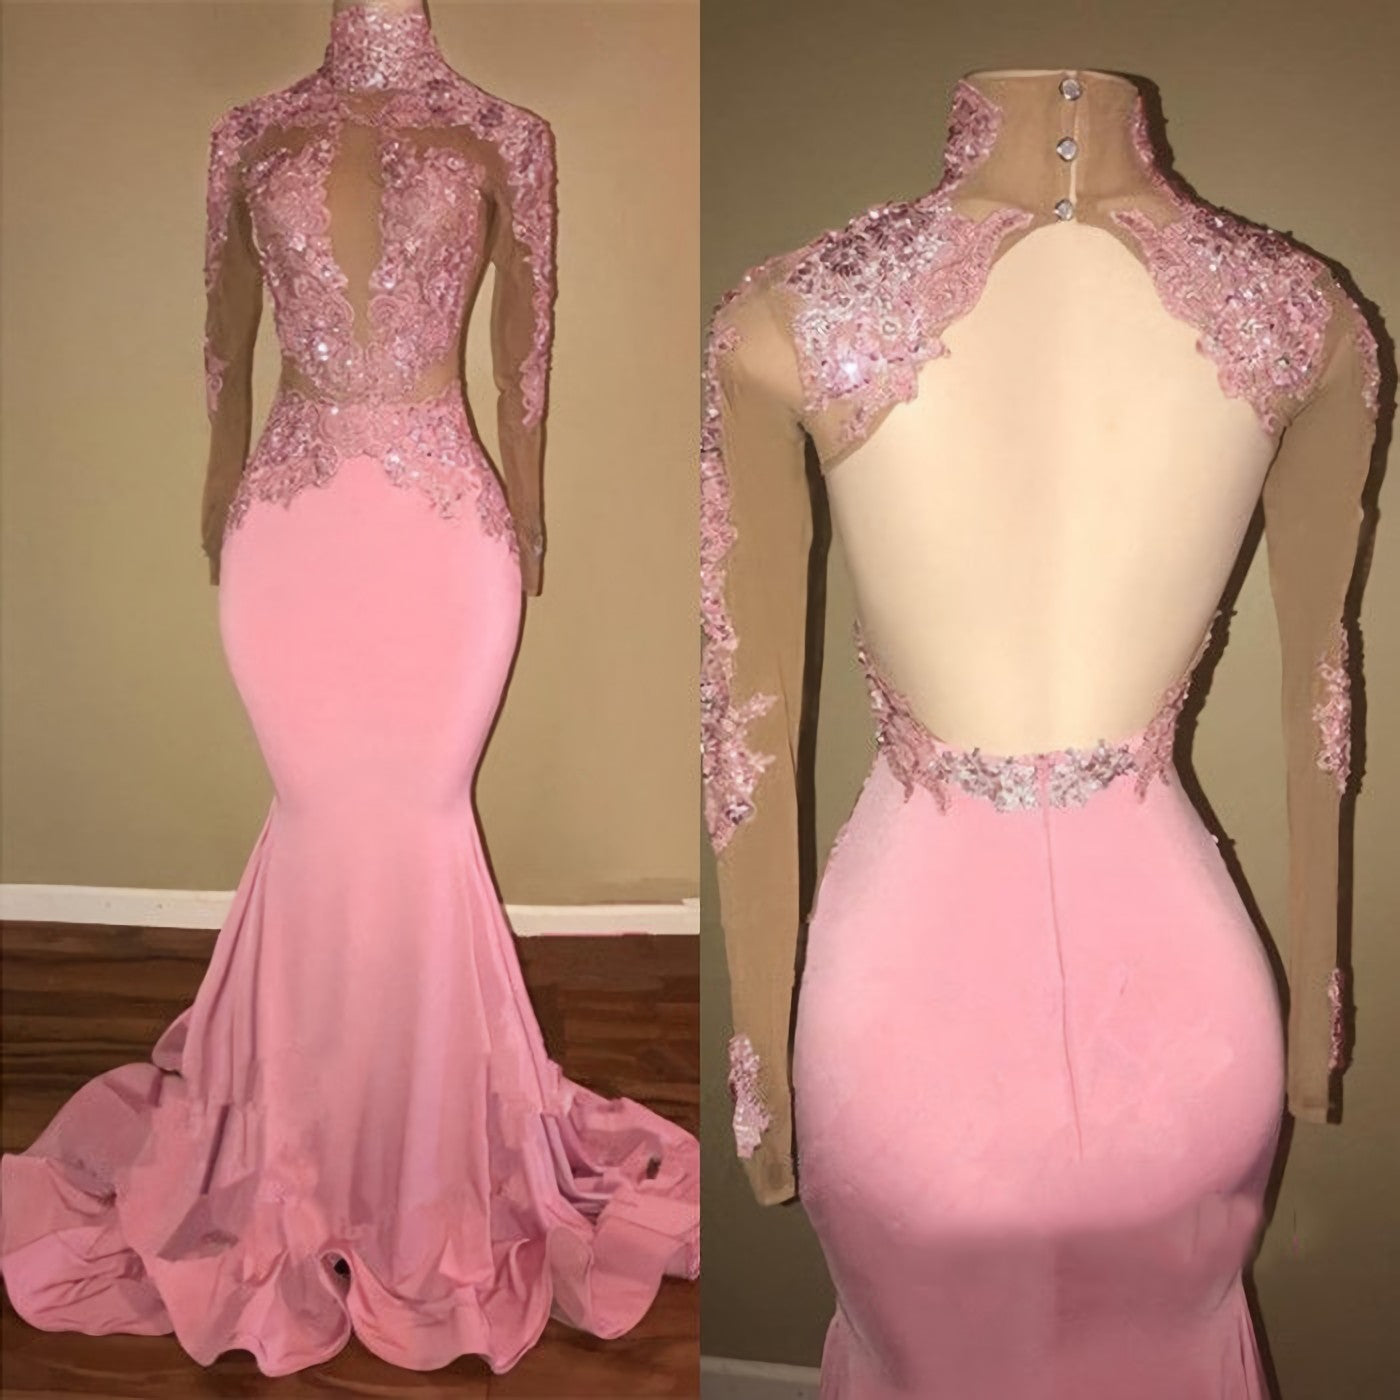 Alluring Pink Mermaid Long Sleeves Backless Elastic Satin Open Front High Neck Corset Prom Dresses 2024 outfit, Prom Dresses Sleeves